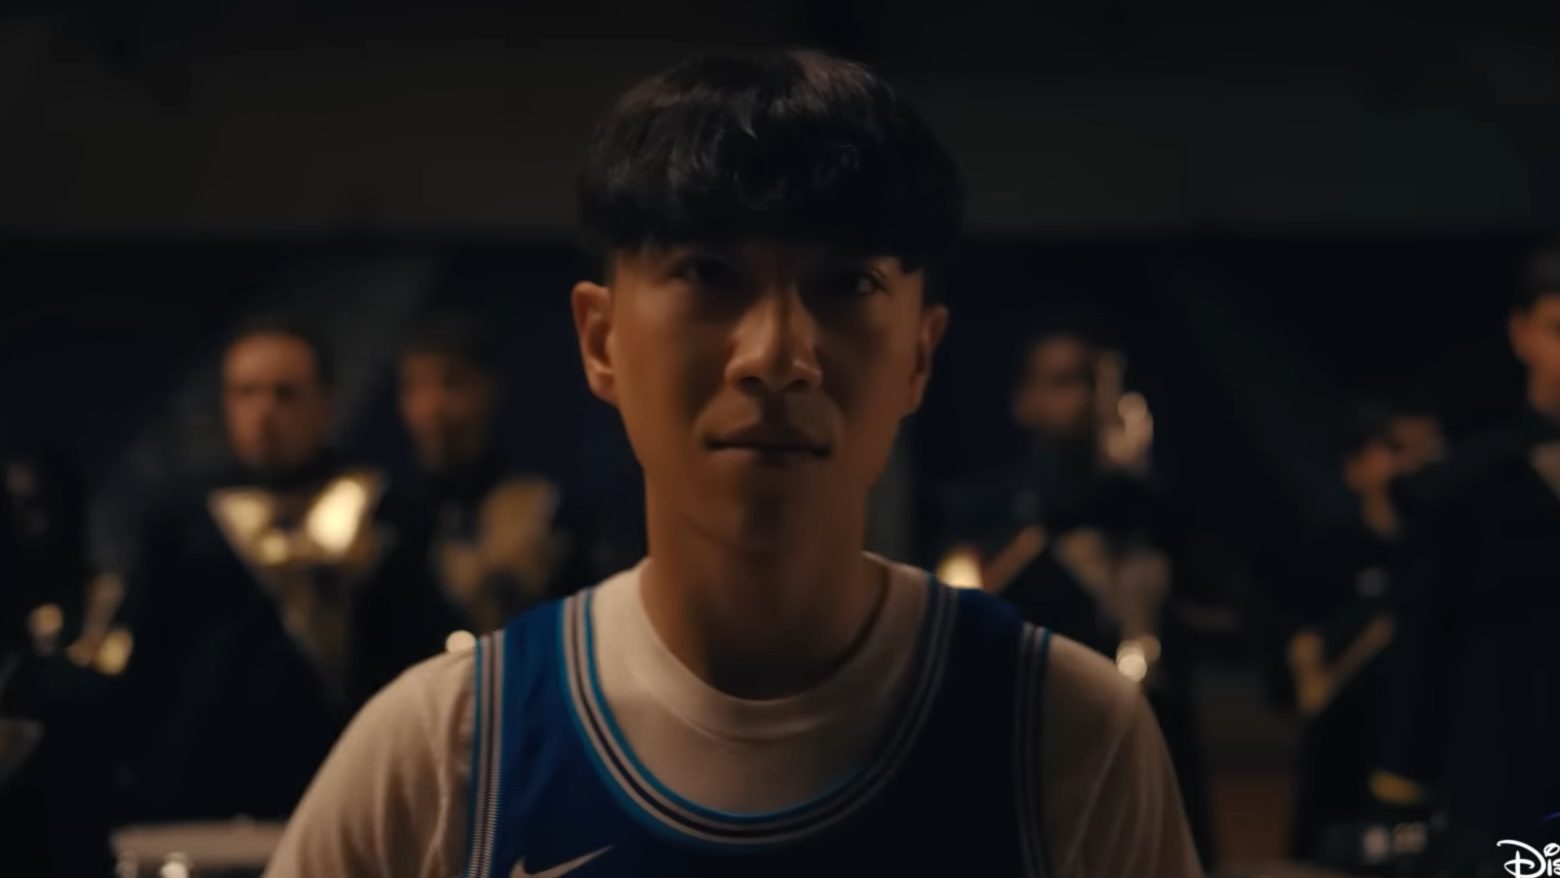 Chang Can Dunk Trailer Teases Disney+'s Basketball Movie